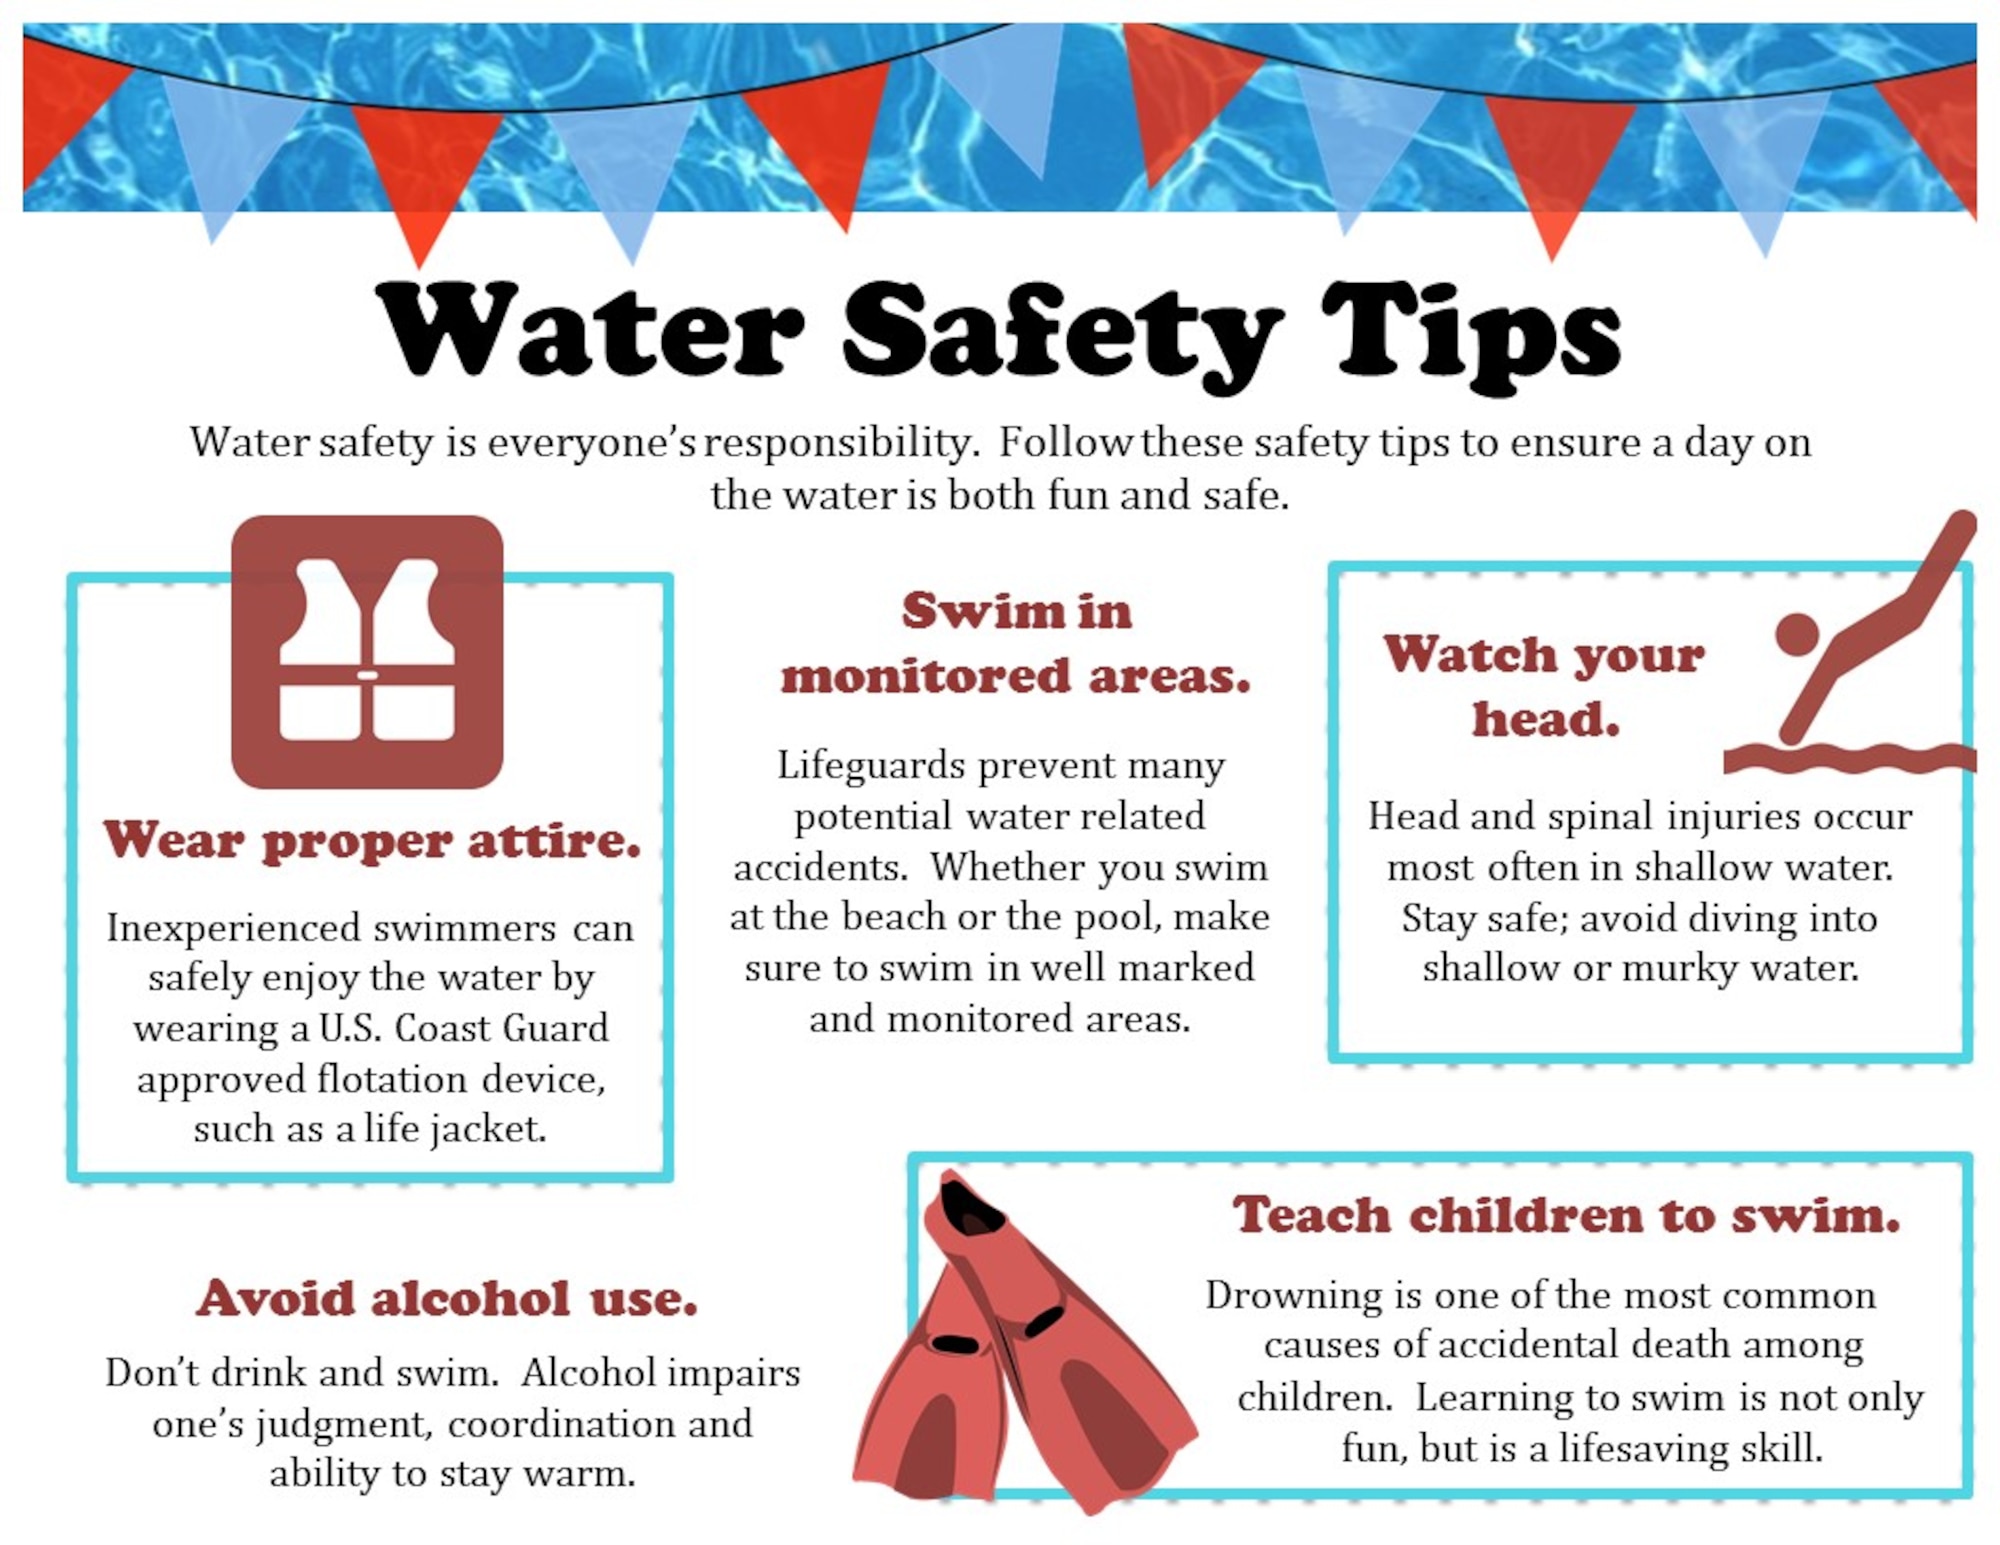 It Summertime, Florida - Keep It Safe and Healthy at the Beach